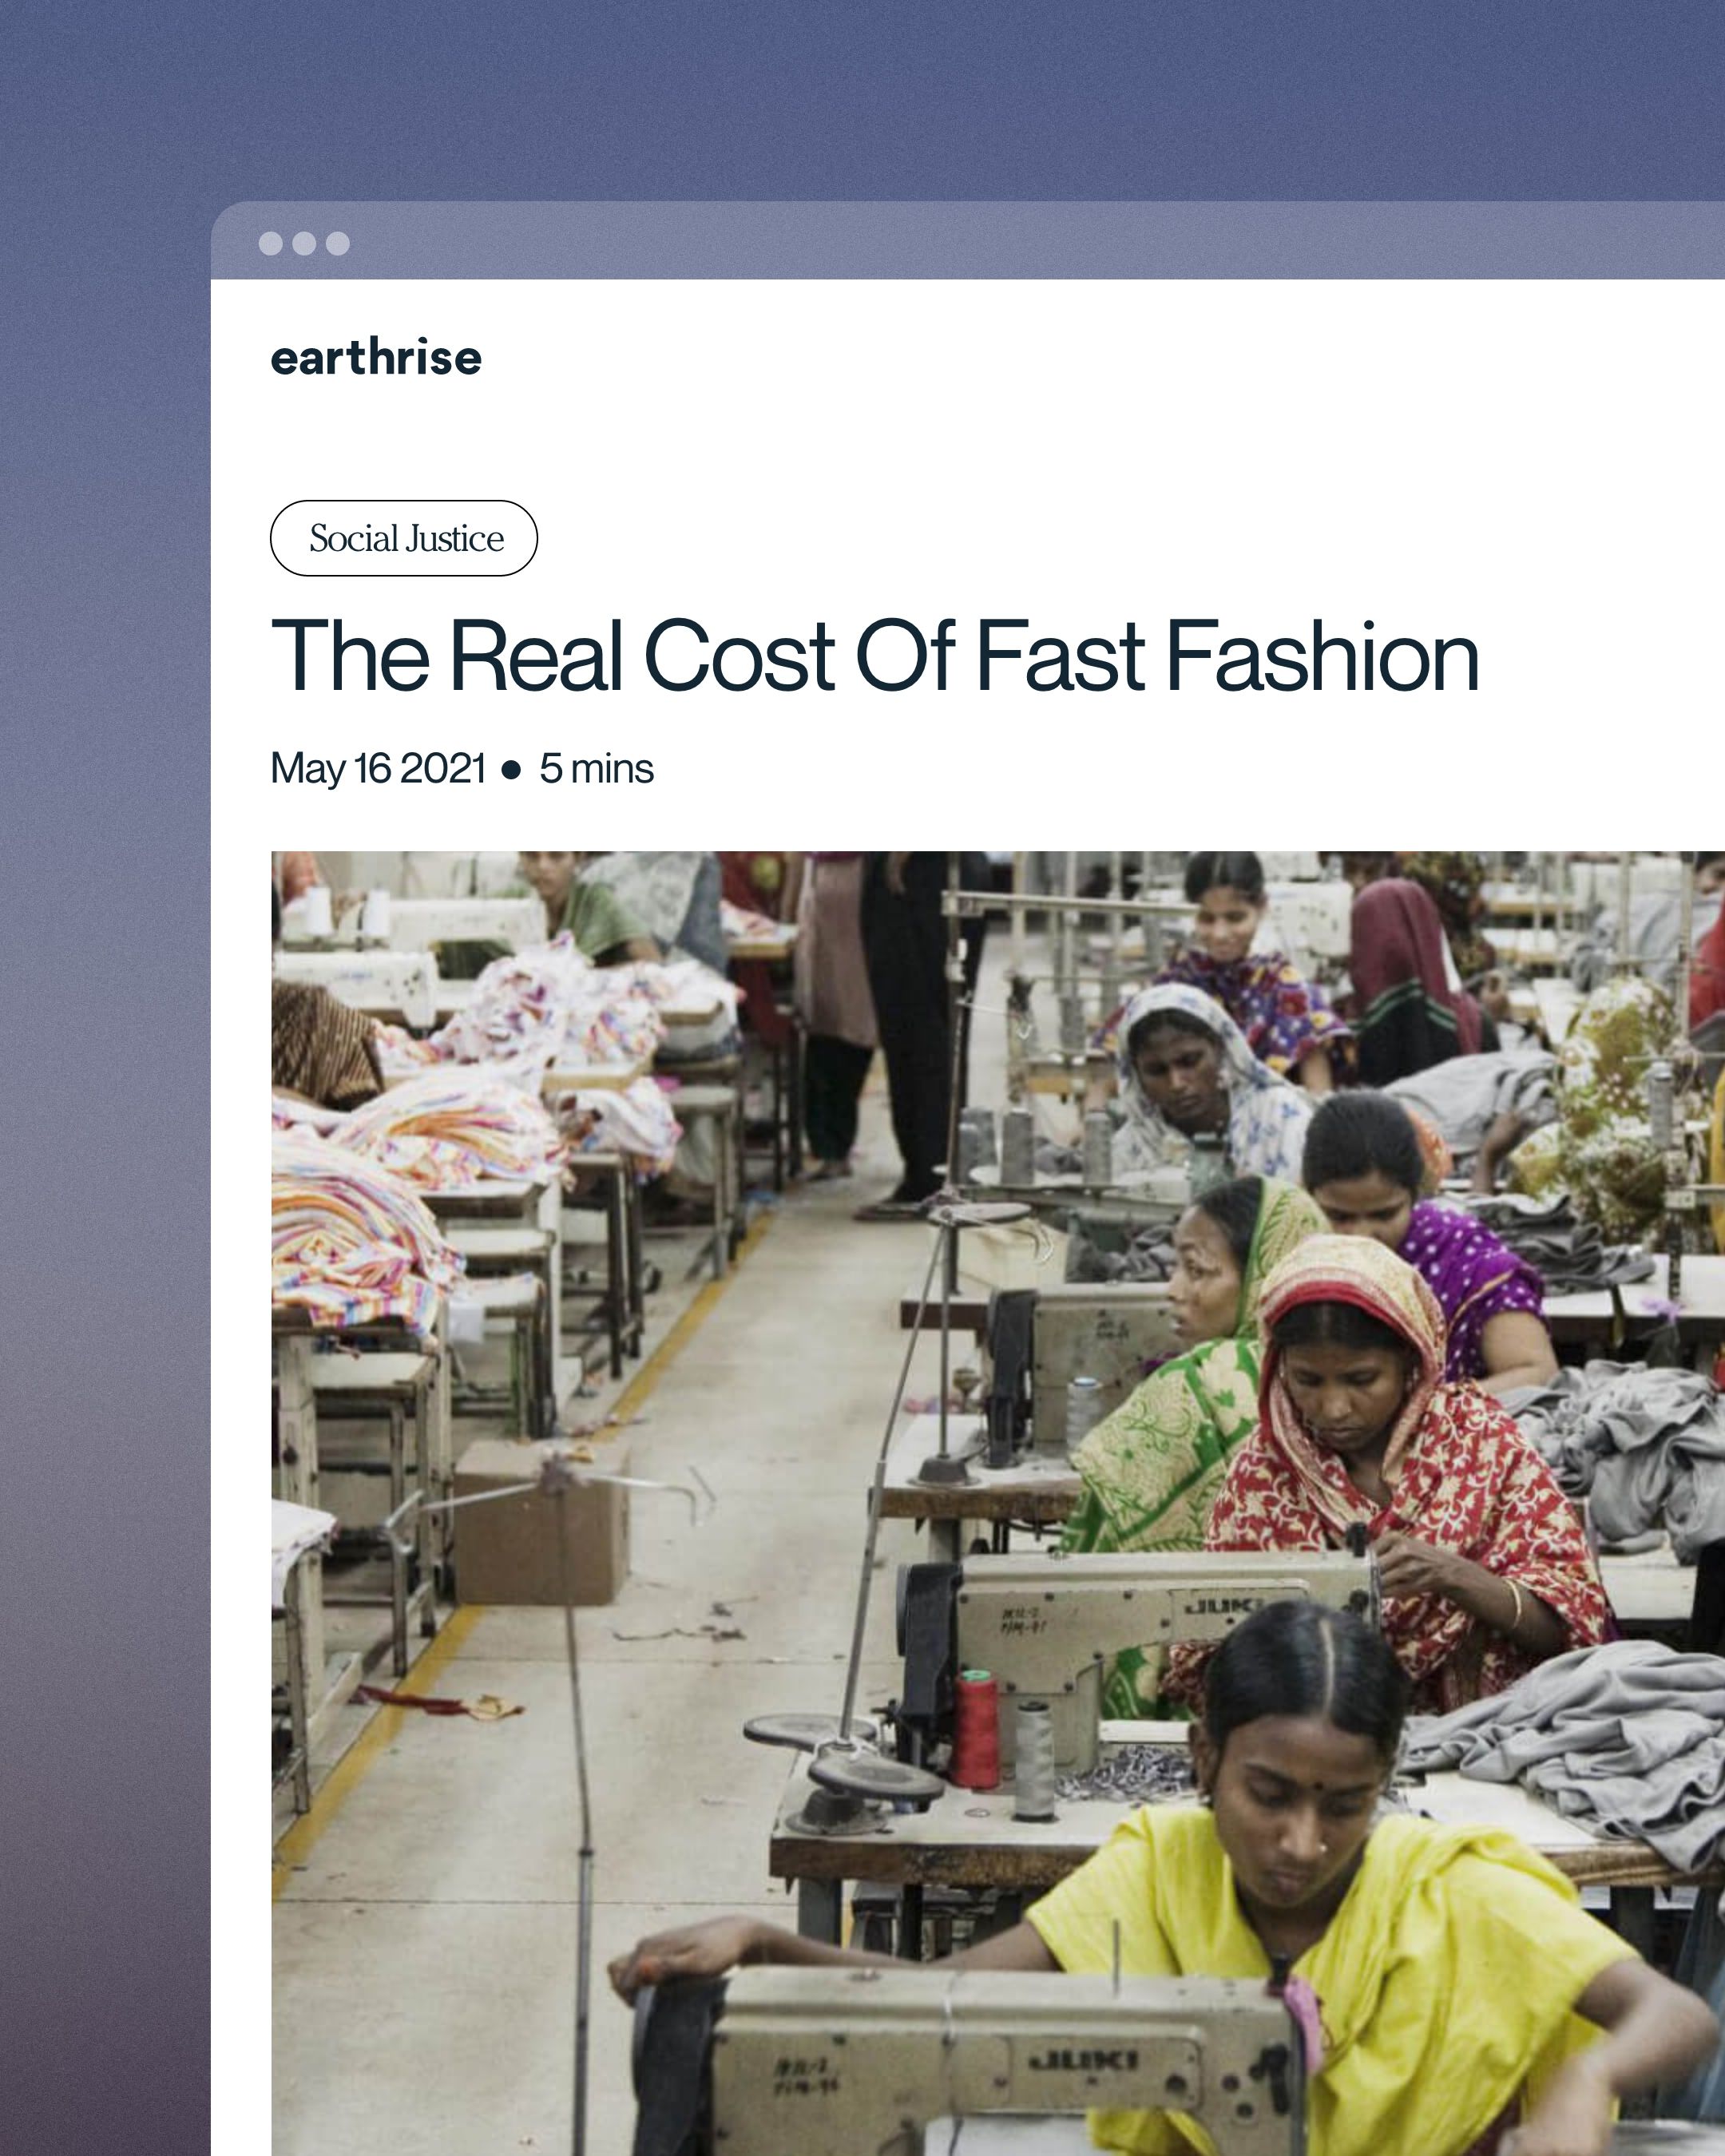 A showcase of a article called "The Real Cost Of Fast Fashion" from the earthrise website